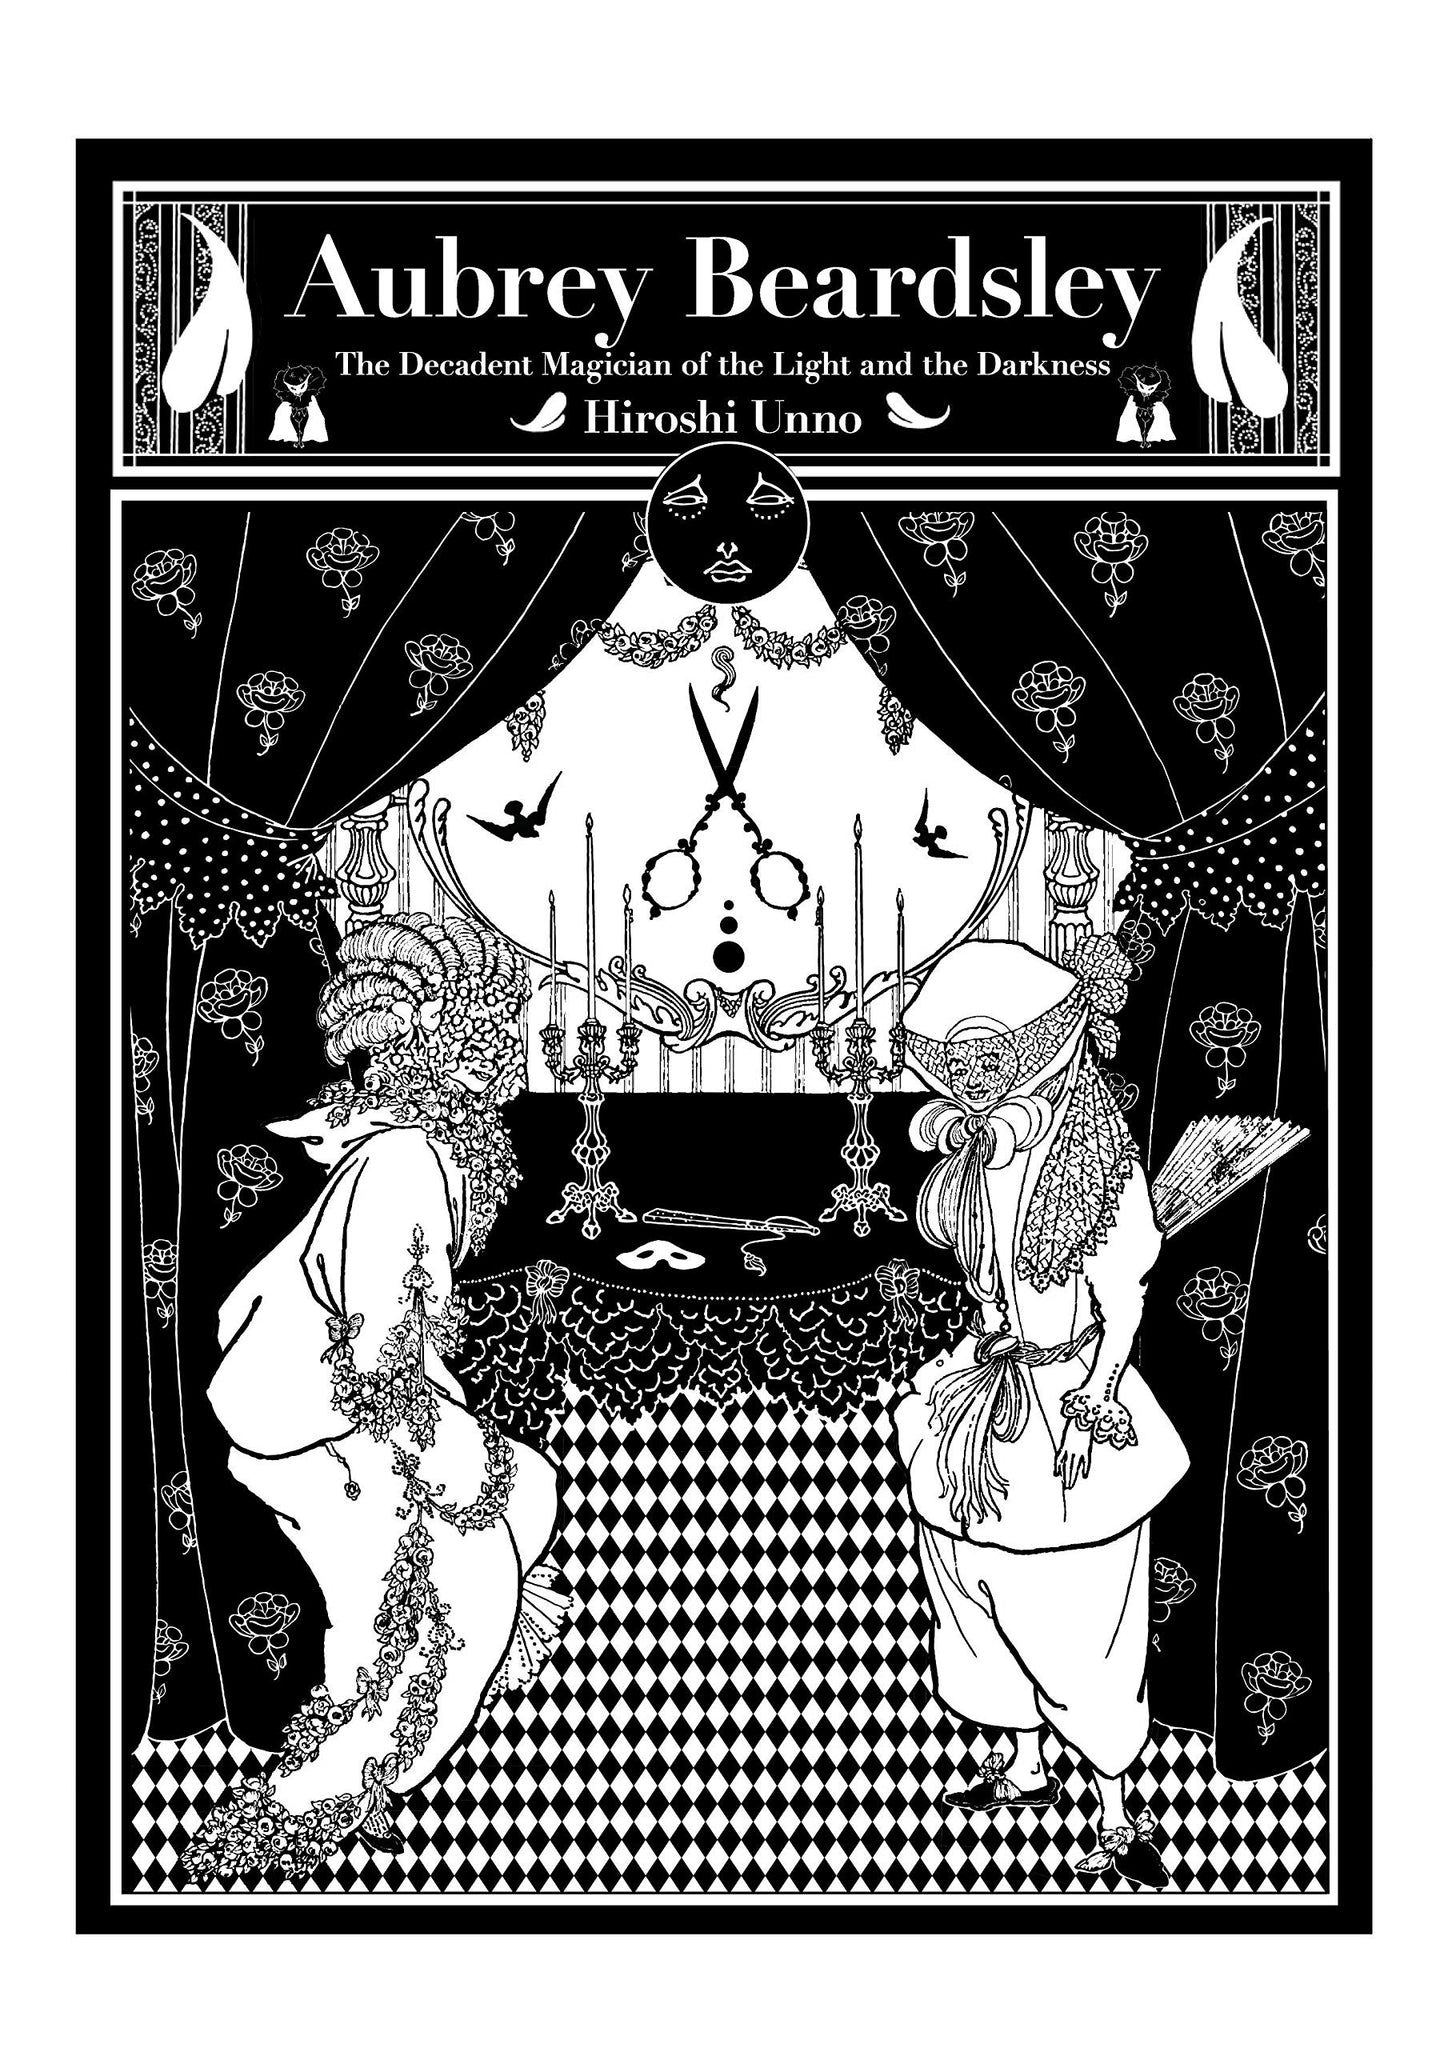 Aubrey Beardsley : The Decadent Magician of the Light & the Darkness by Hiroshi Unno